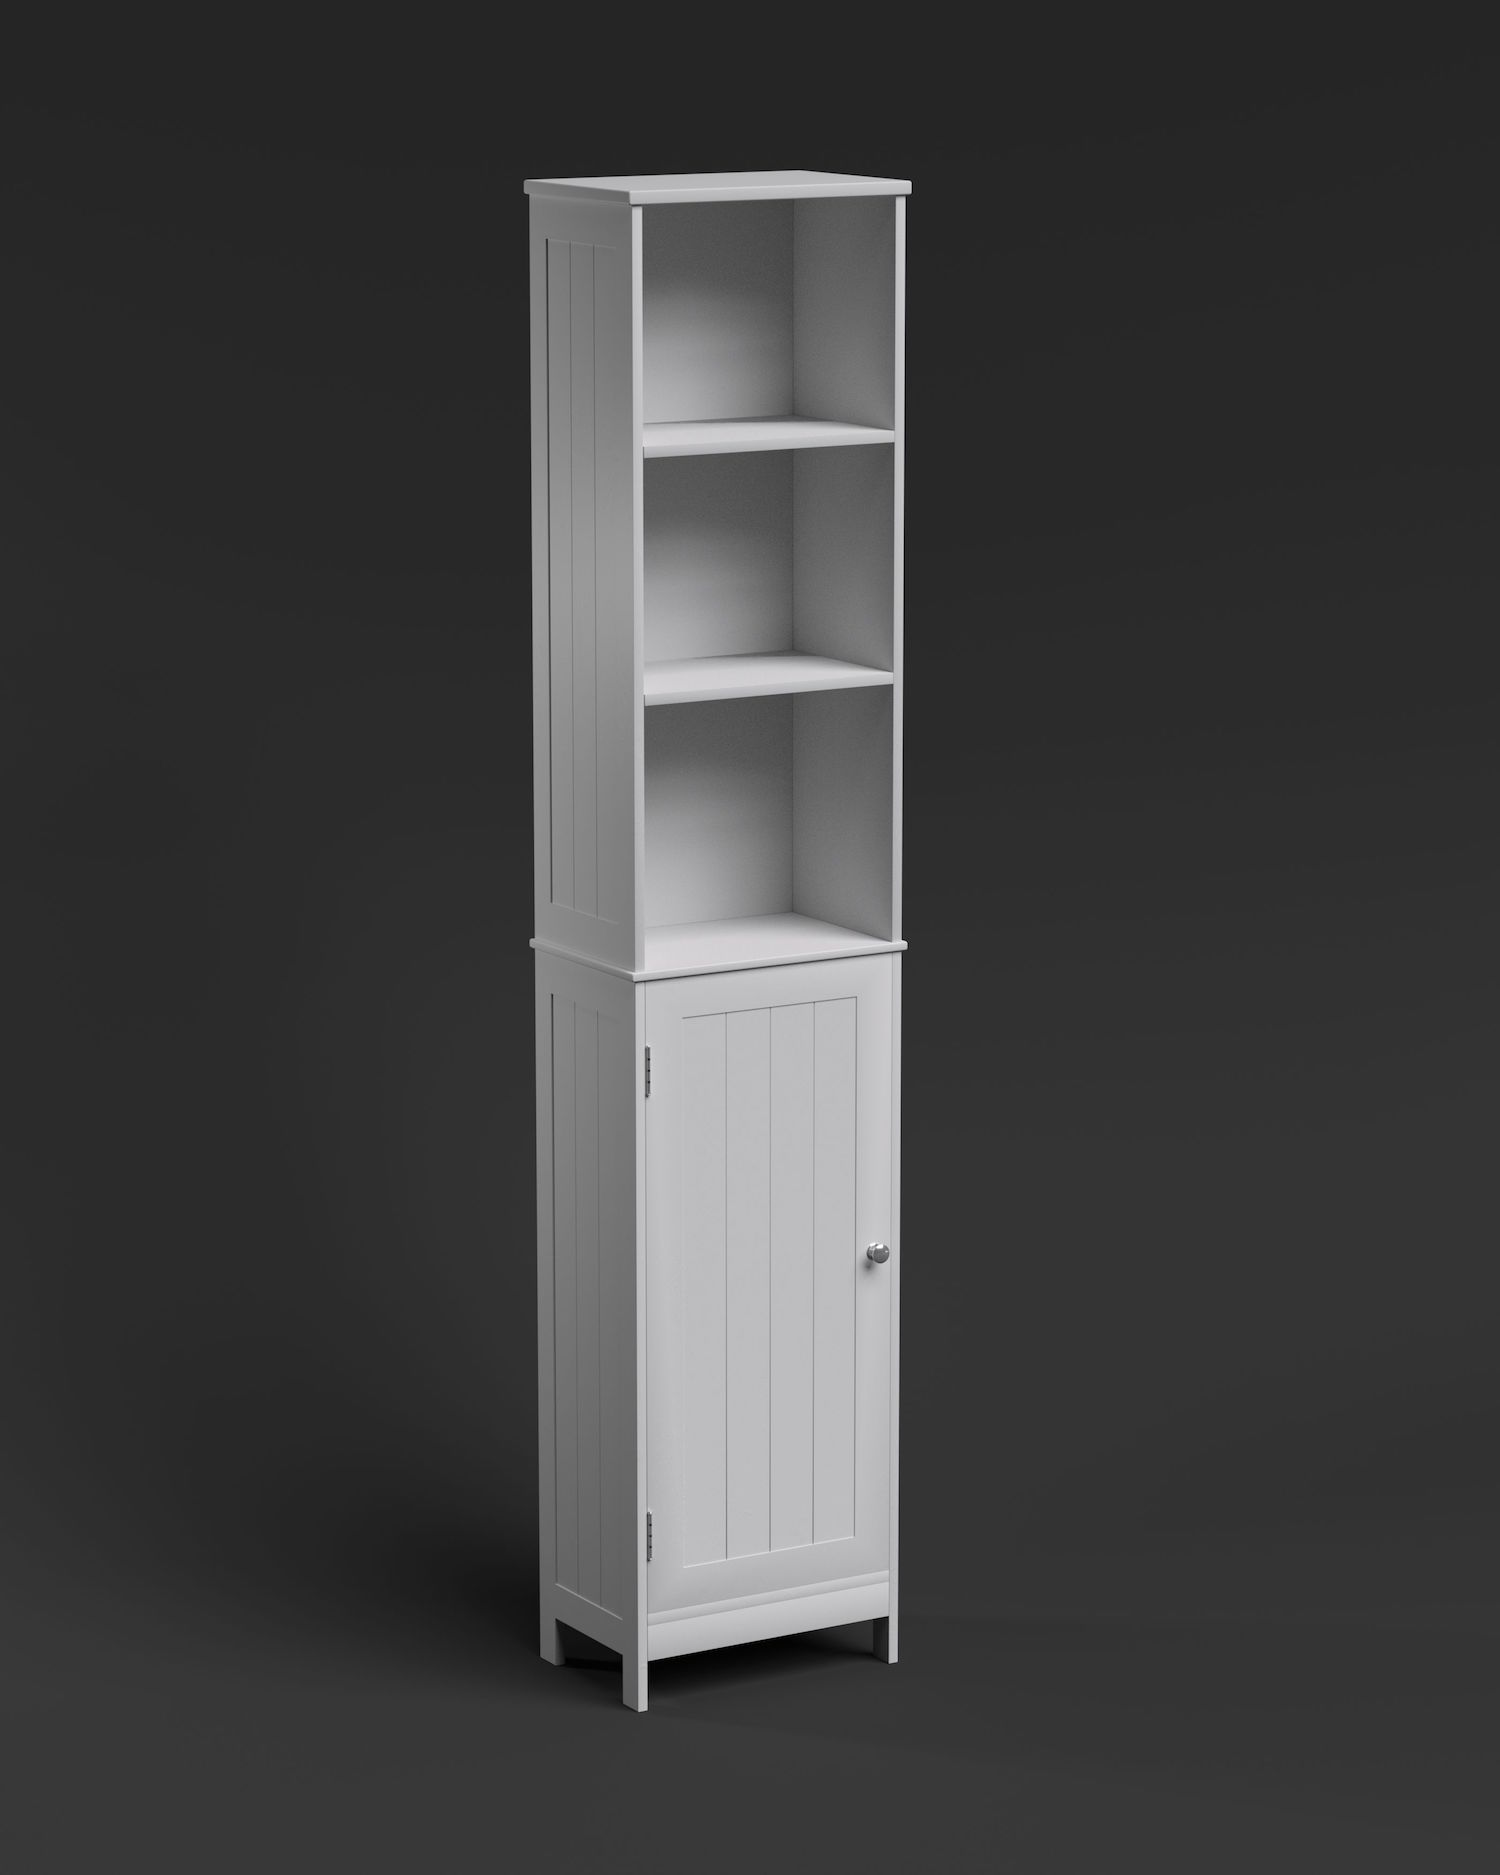 Tall Bathroom Cabinet Home And Garden All Your Home Interior